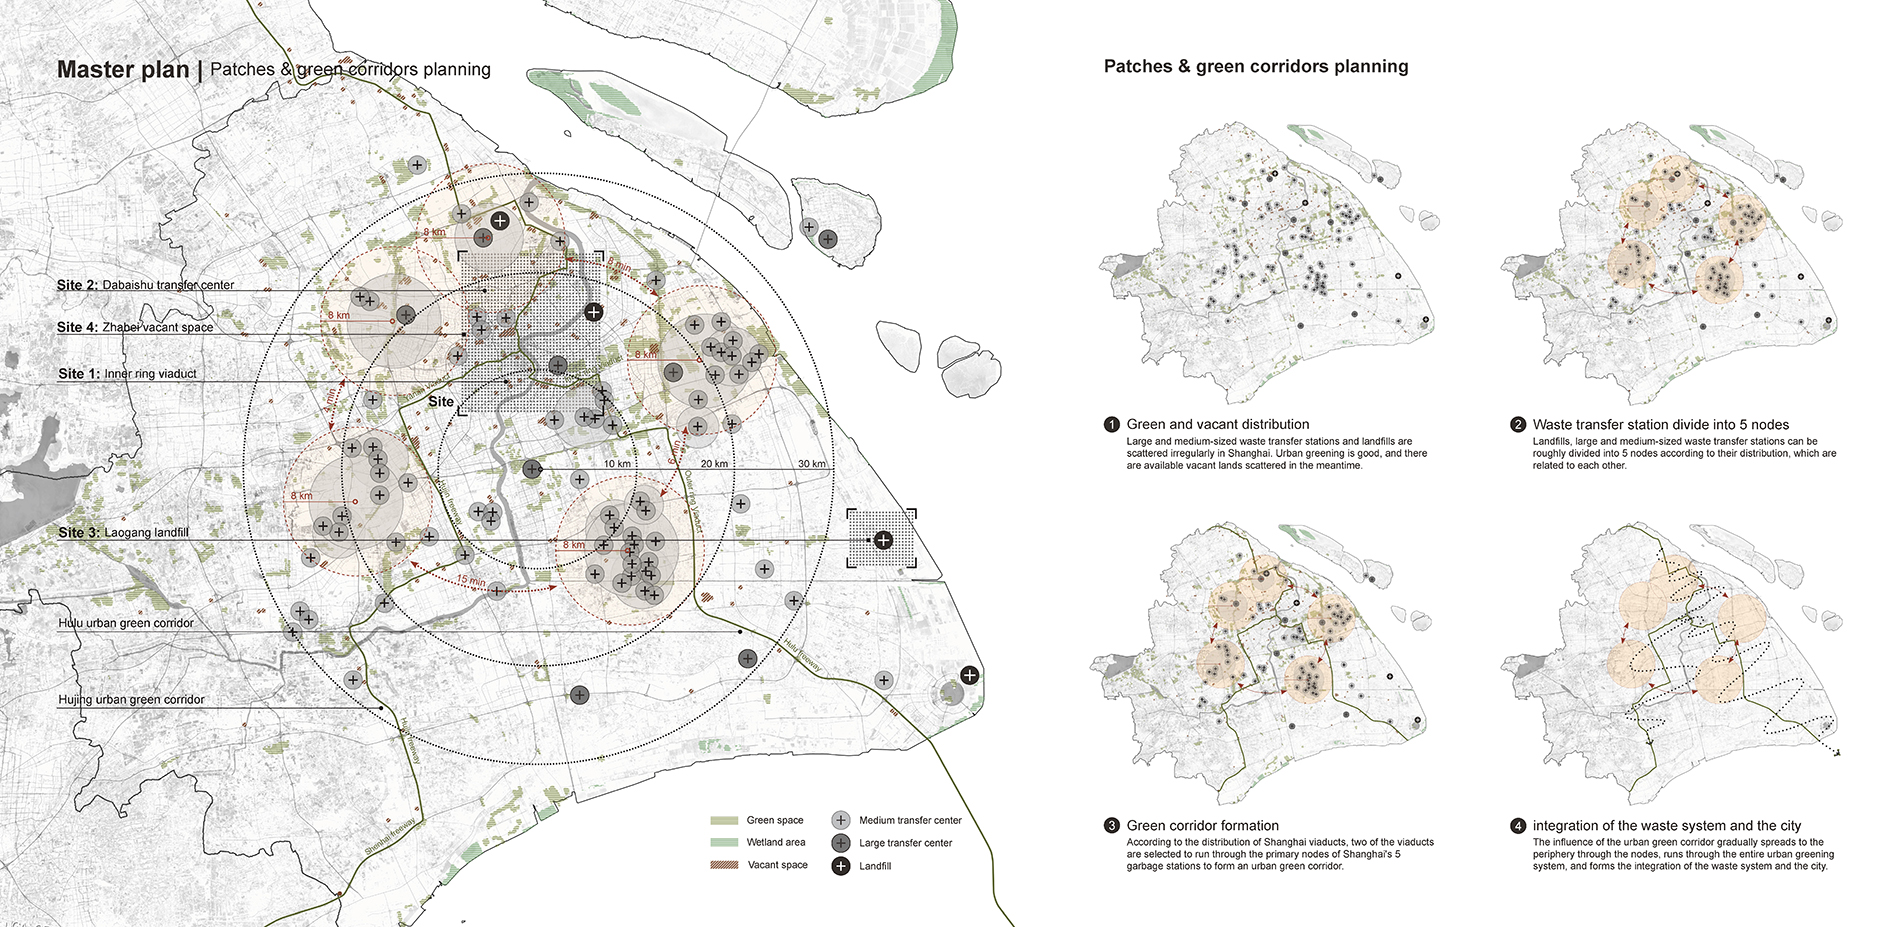 Master Plan of Habitat Patches and Corridors